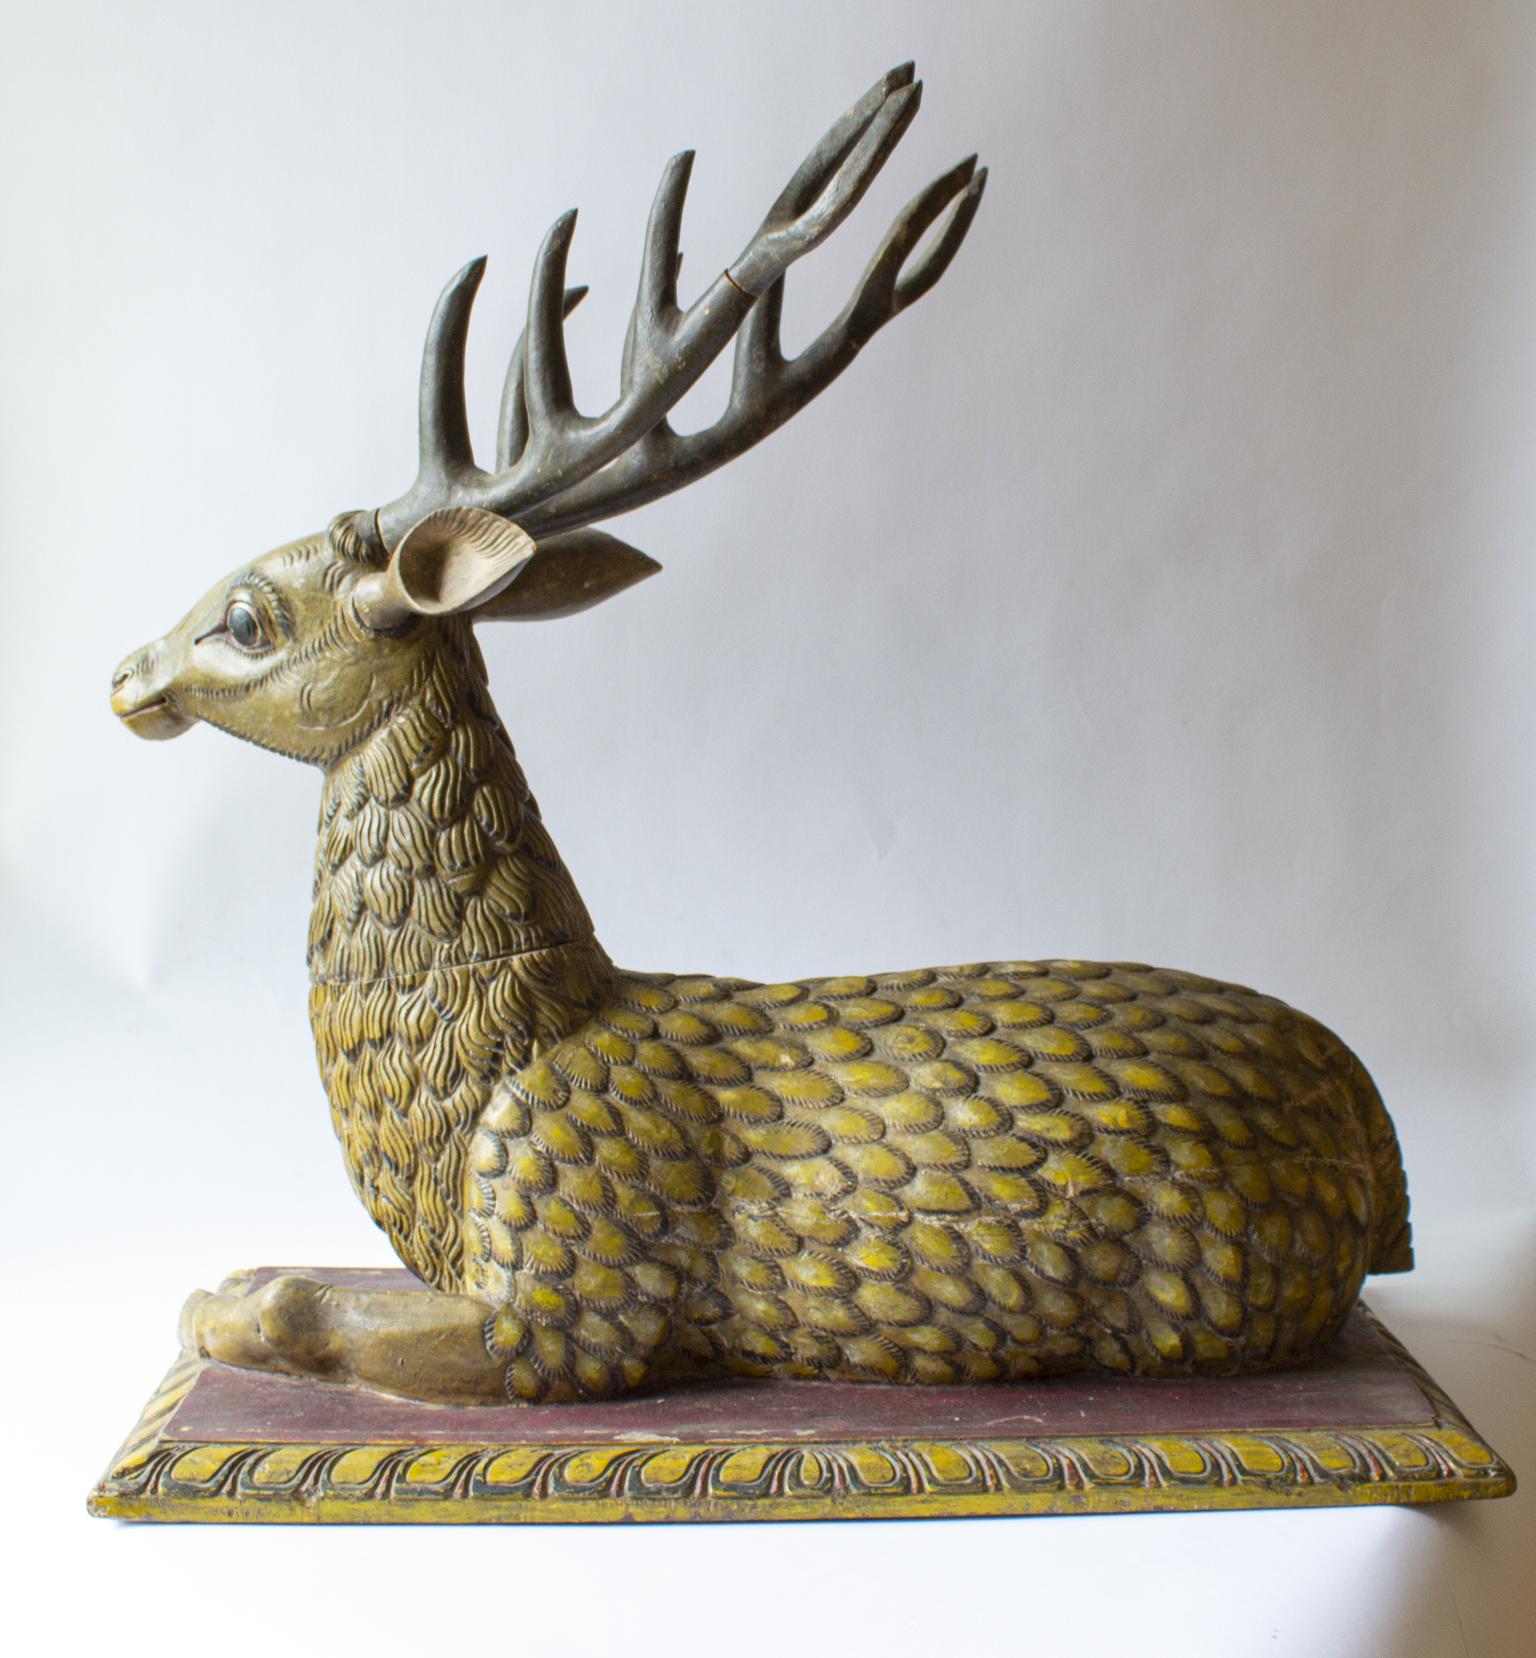 A big hand carved painted stag sculpture in wood, early 1800th century. Preowned by a collector. This sculpture are one of a kind.

The stag deer are a symbol of spiritual authority, a deer stag is here depicted in all its magnificent elegance.